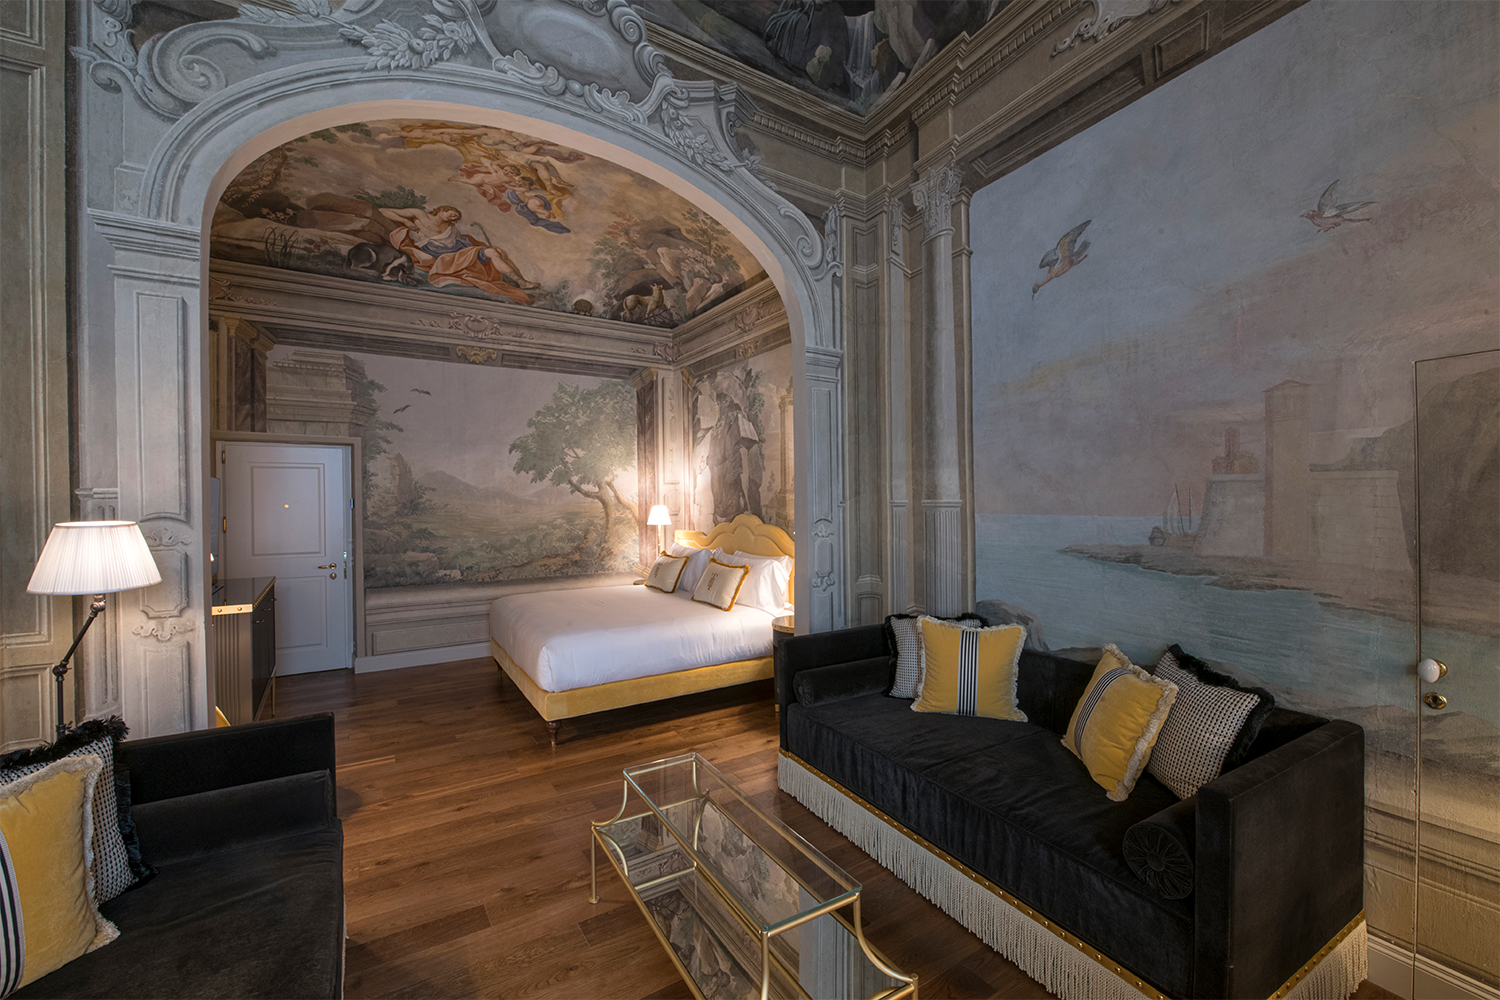 A room at Il Tornabuoni, a new hotel in Florence, Italy, in a converted palazzo